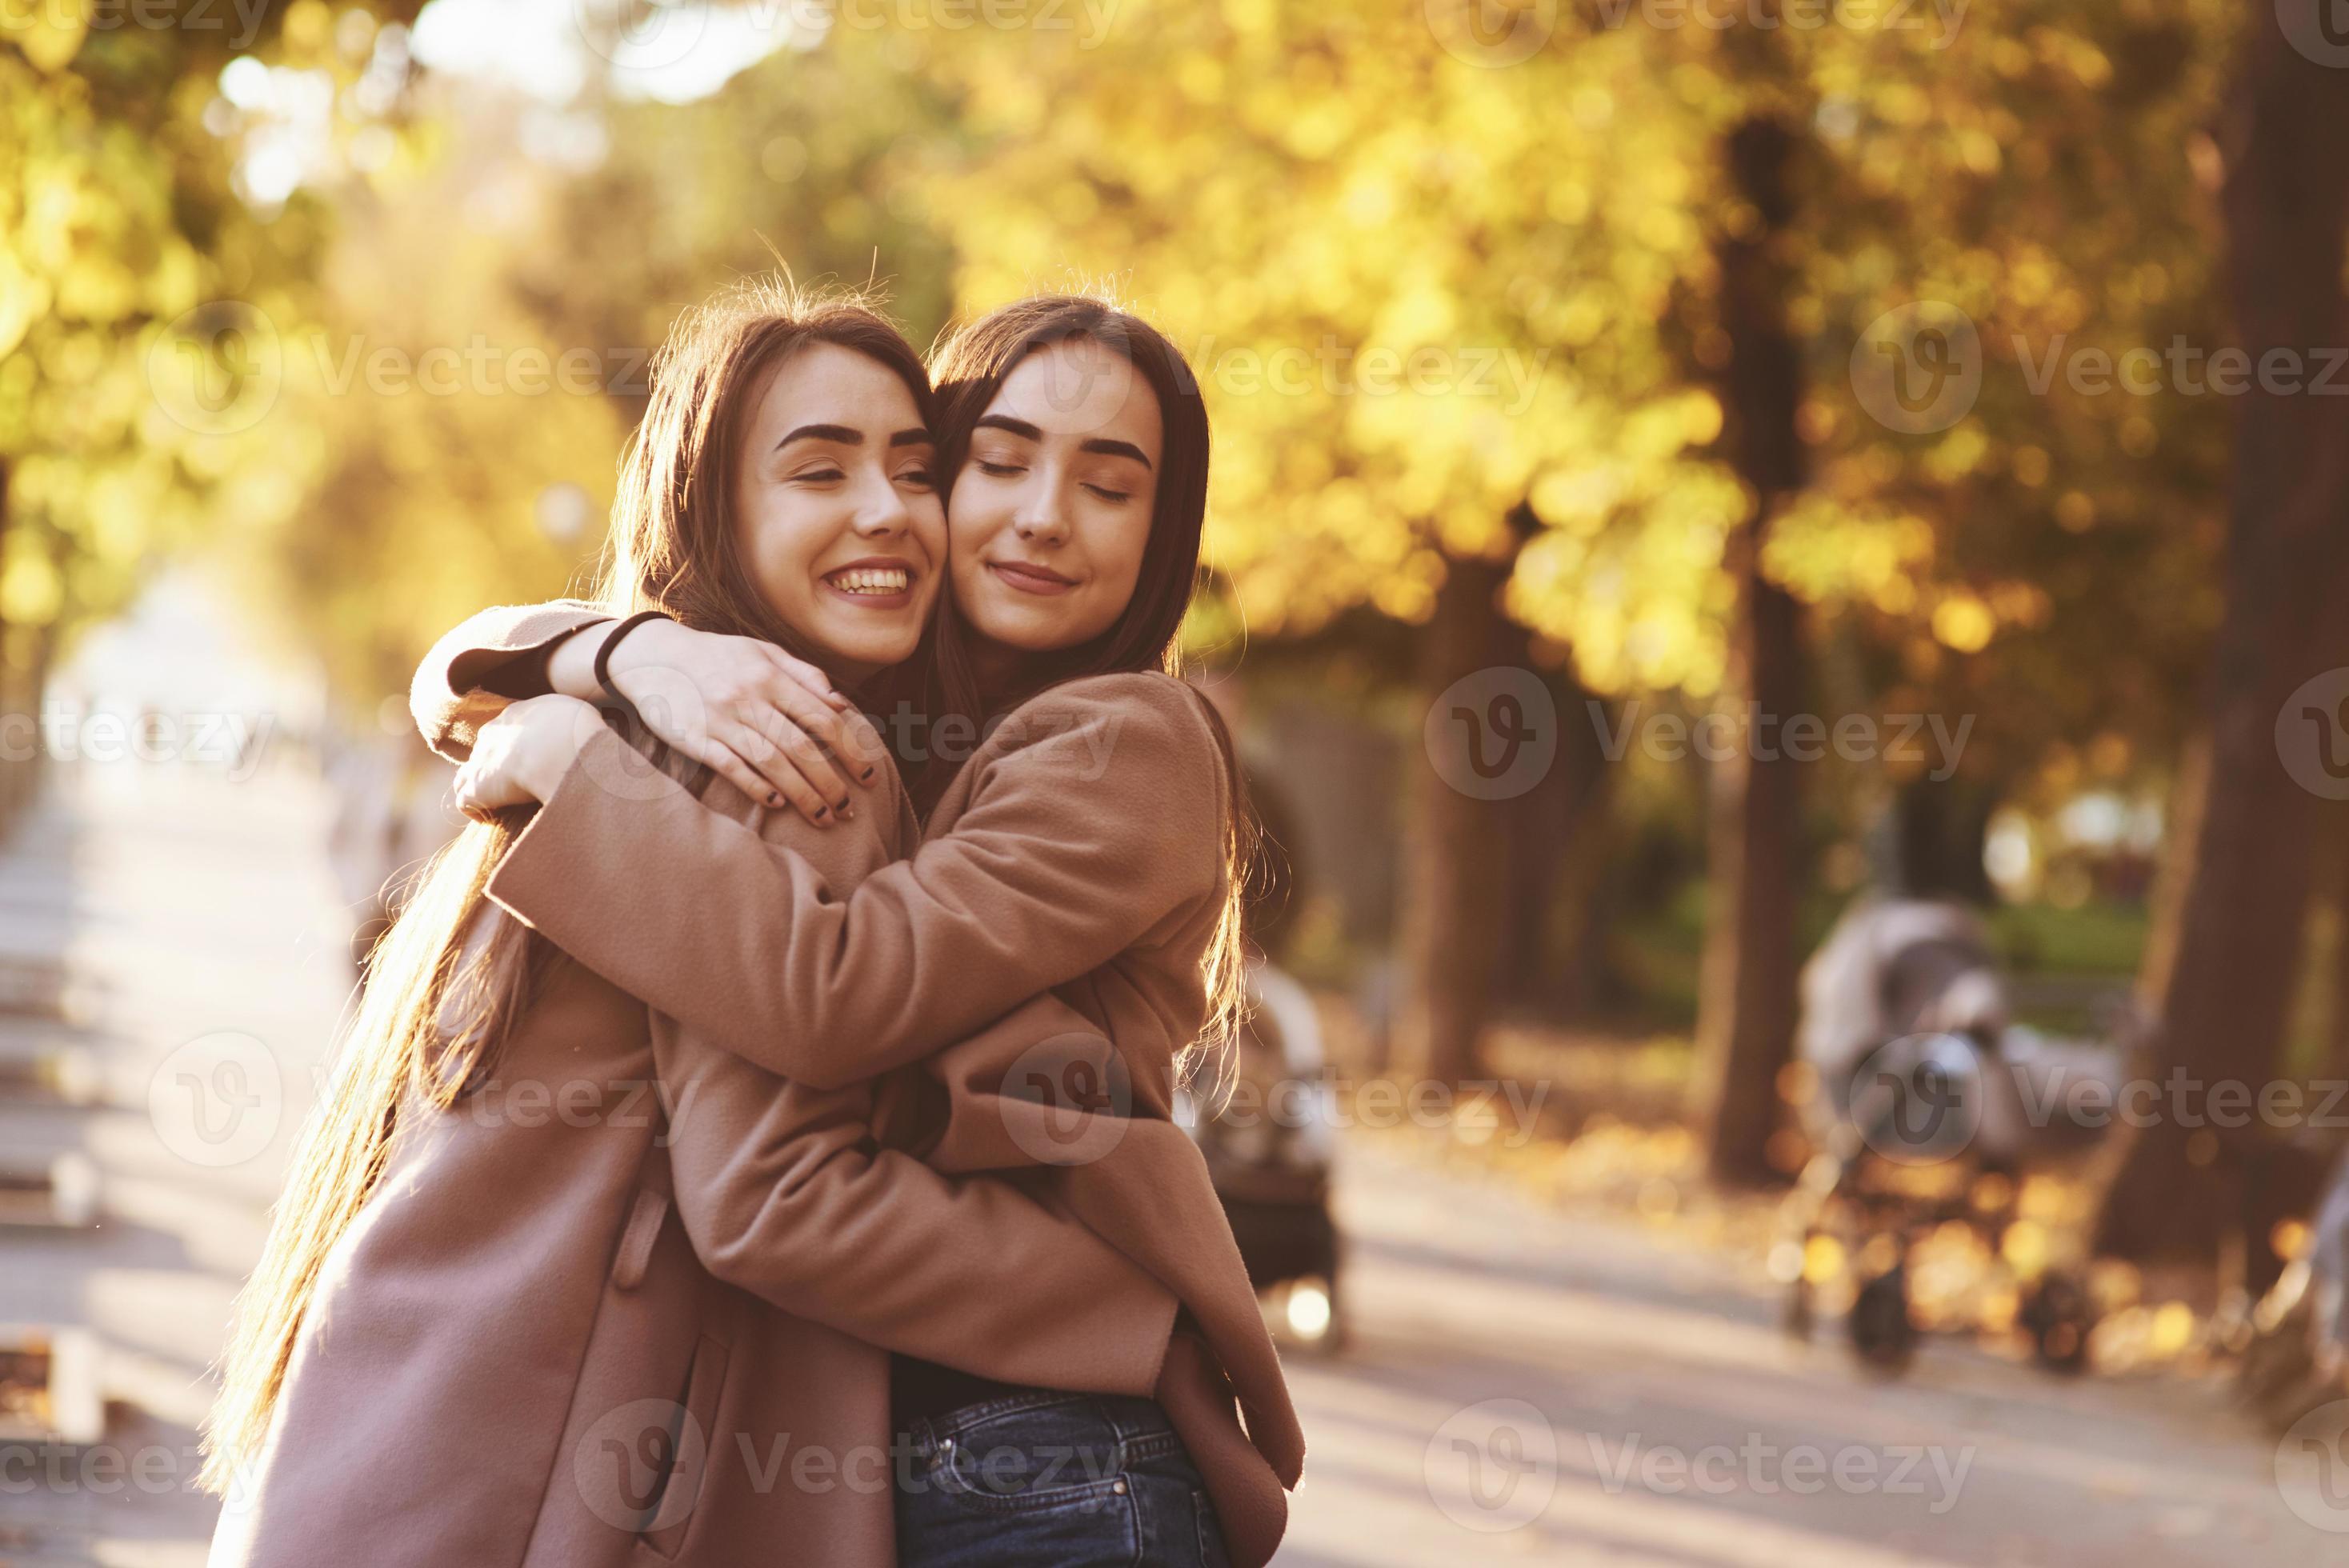 Two girls looking 2 stock photo. Image of focus, casual - 3255830